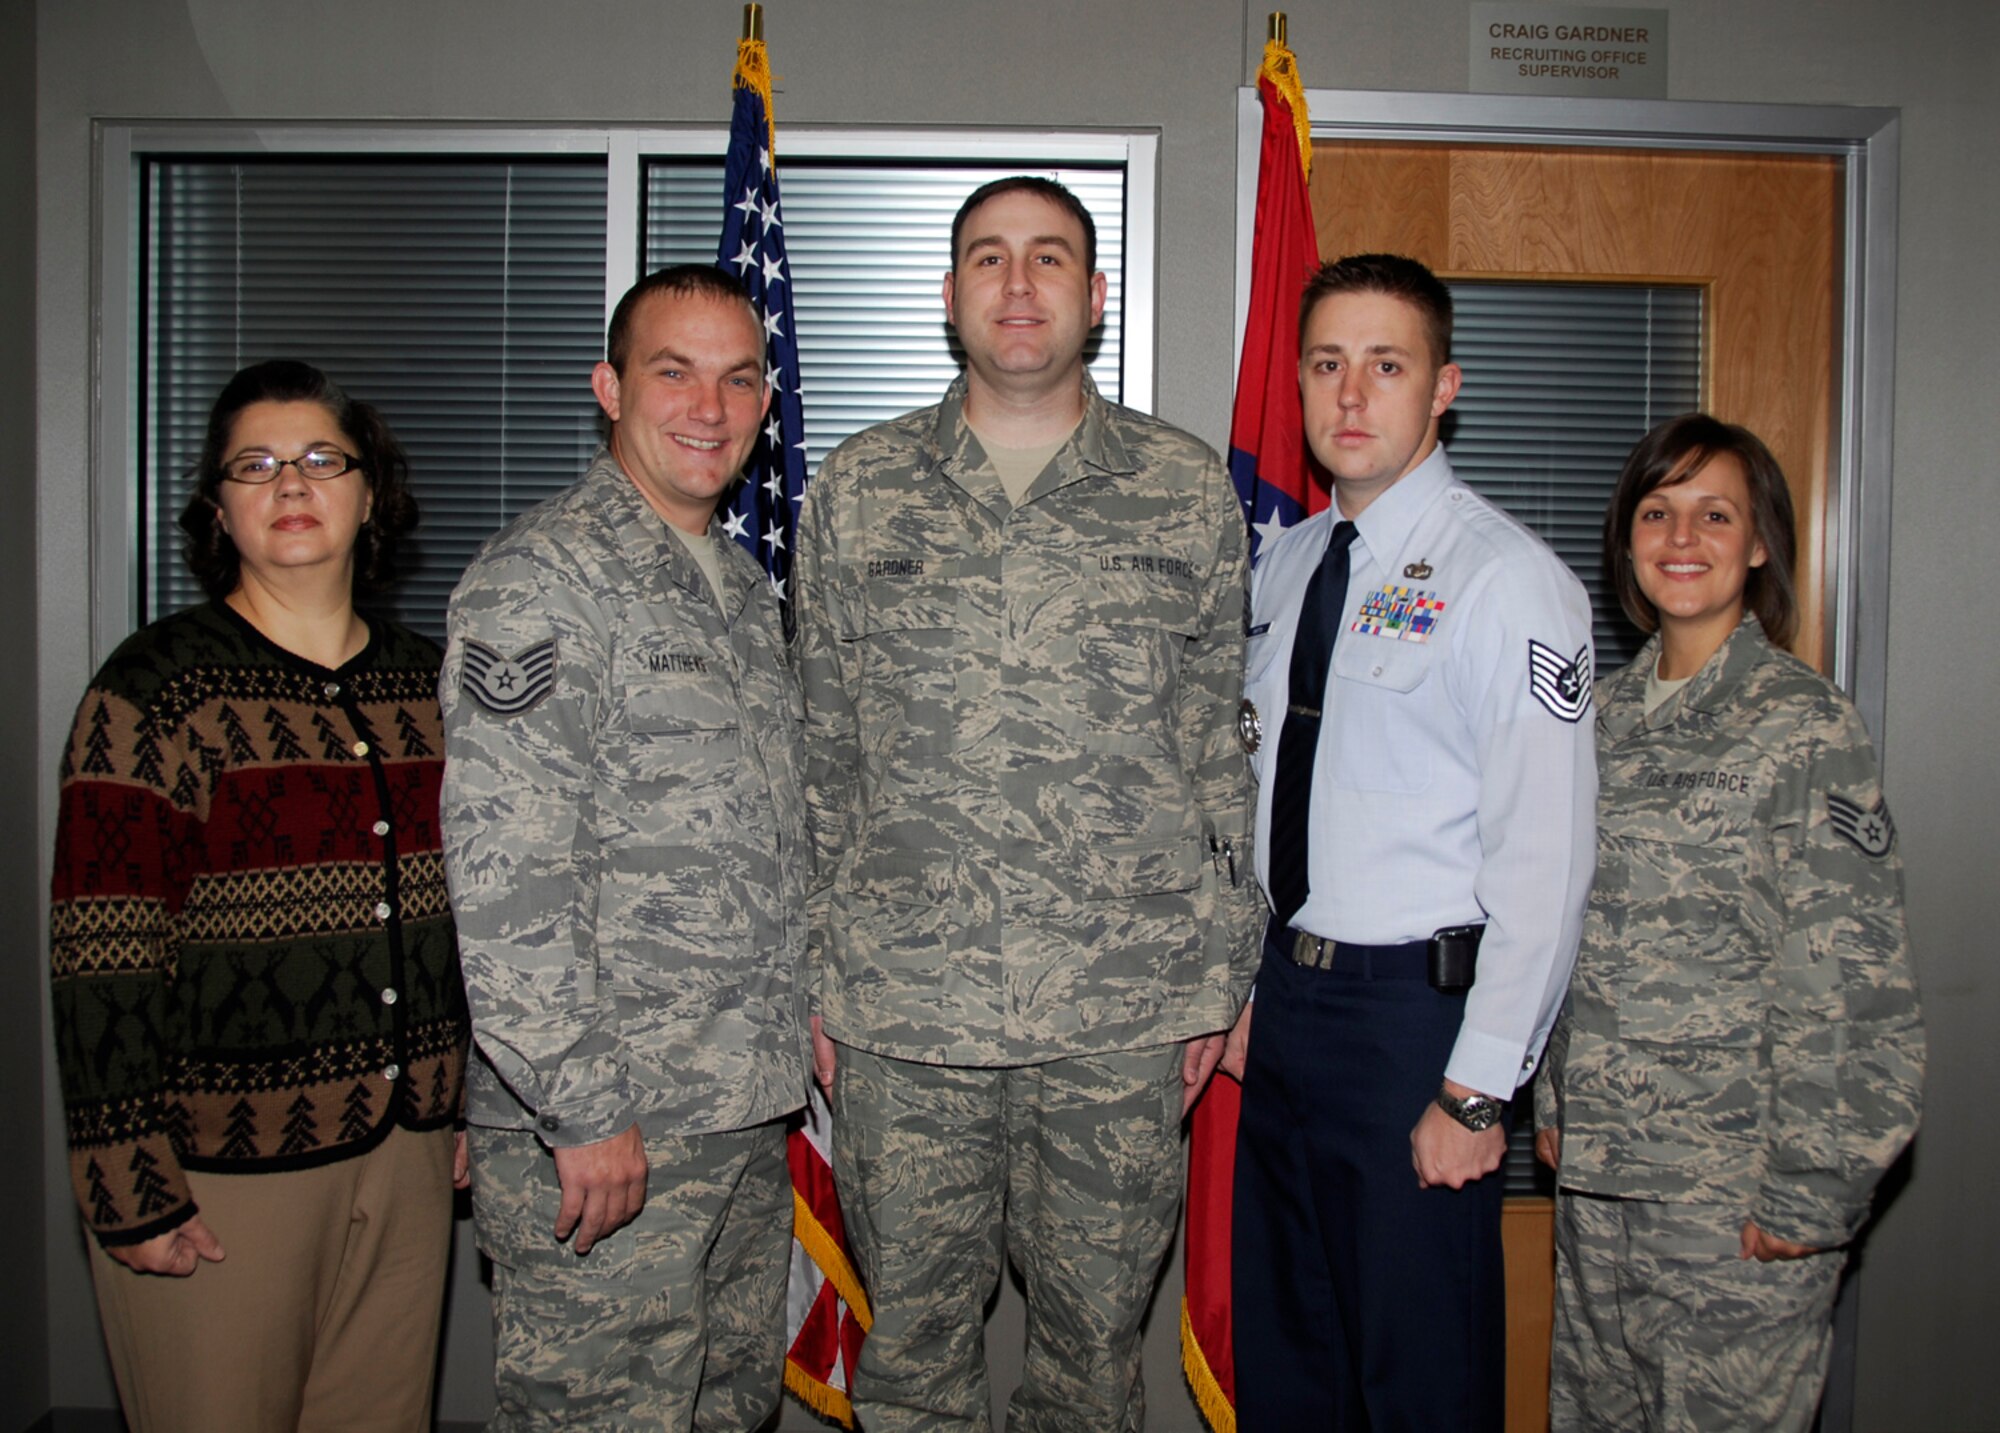 From left: Ms. Stephanie Parrish, Tech Sgt. Jeff Mathews, Master Sgt. Craig Gardner, Tech Sgt. Eric Martin and Staff Sgt. Jean Jackson. The 188th recruiting office earned the state award and Southeast Regional accolade for Outstanding Recruiting Office of the Year at the Arkansas Air National Guard Recruiting and Retention State Conference Oct. 29, 2009, in Mt. Ida, Ark. Martin earned the state and regional awards for Outstanding Rookie Recruiter of the Year. Gardner earned the state award for Outstanding Recruiting Office Supervisor of the Year. (U.S. Air Force photo by Senior Master Sgt. Dennis Brambl/188th Fighter Wing Public Affairs)